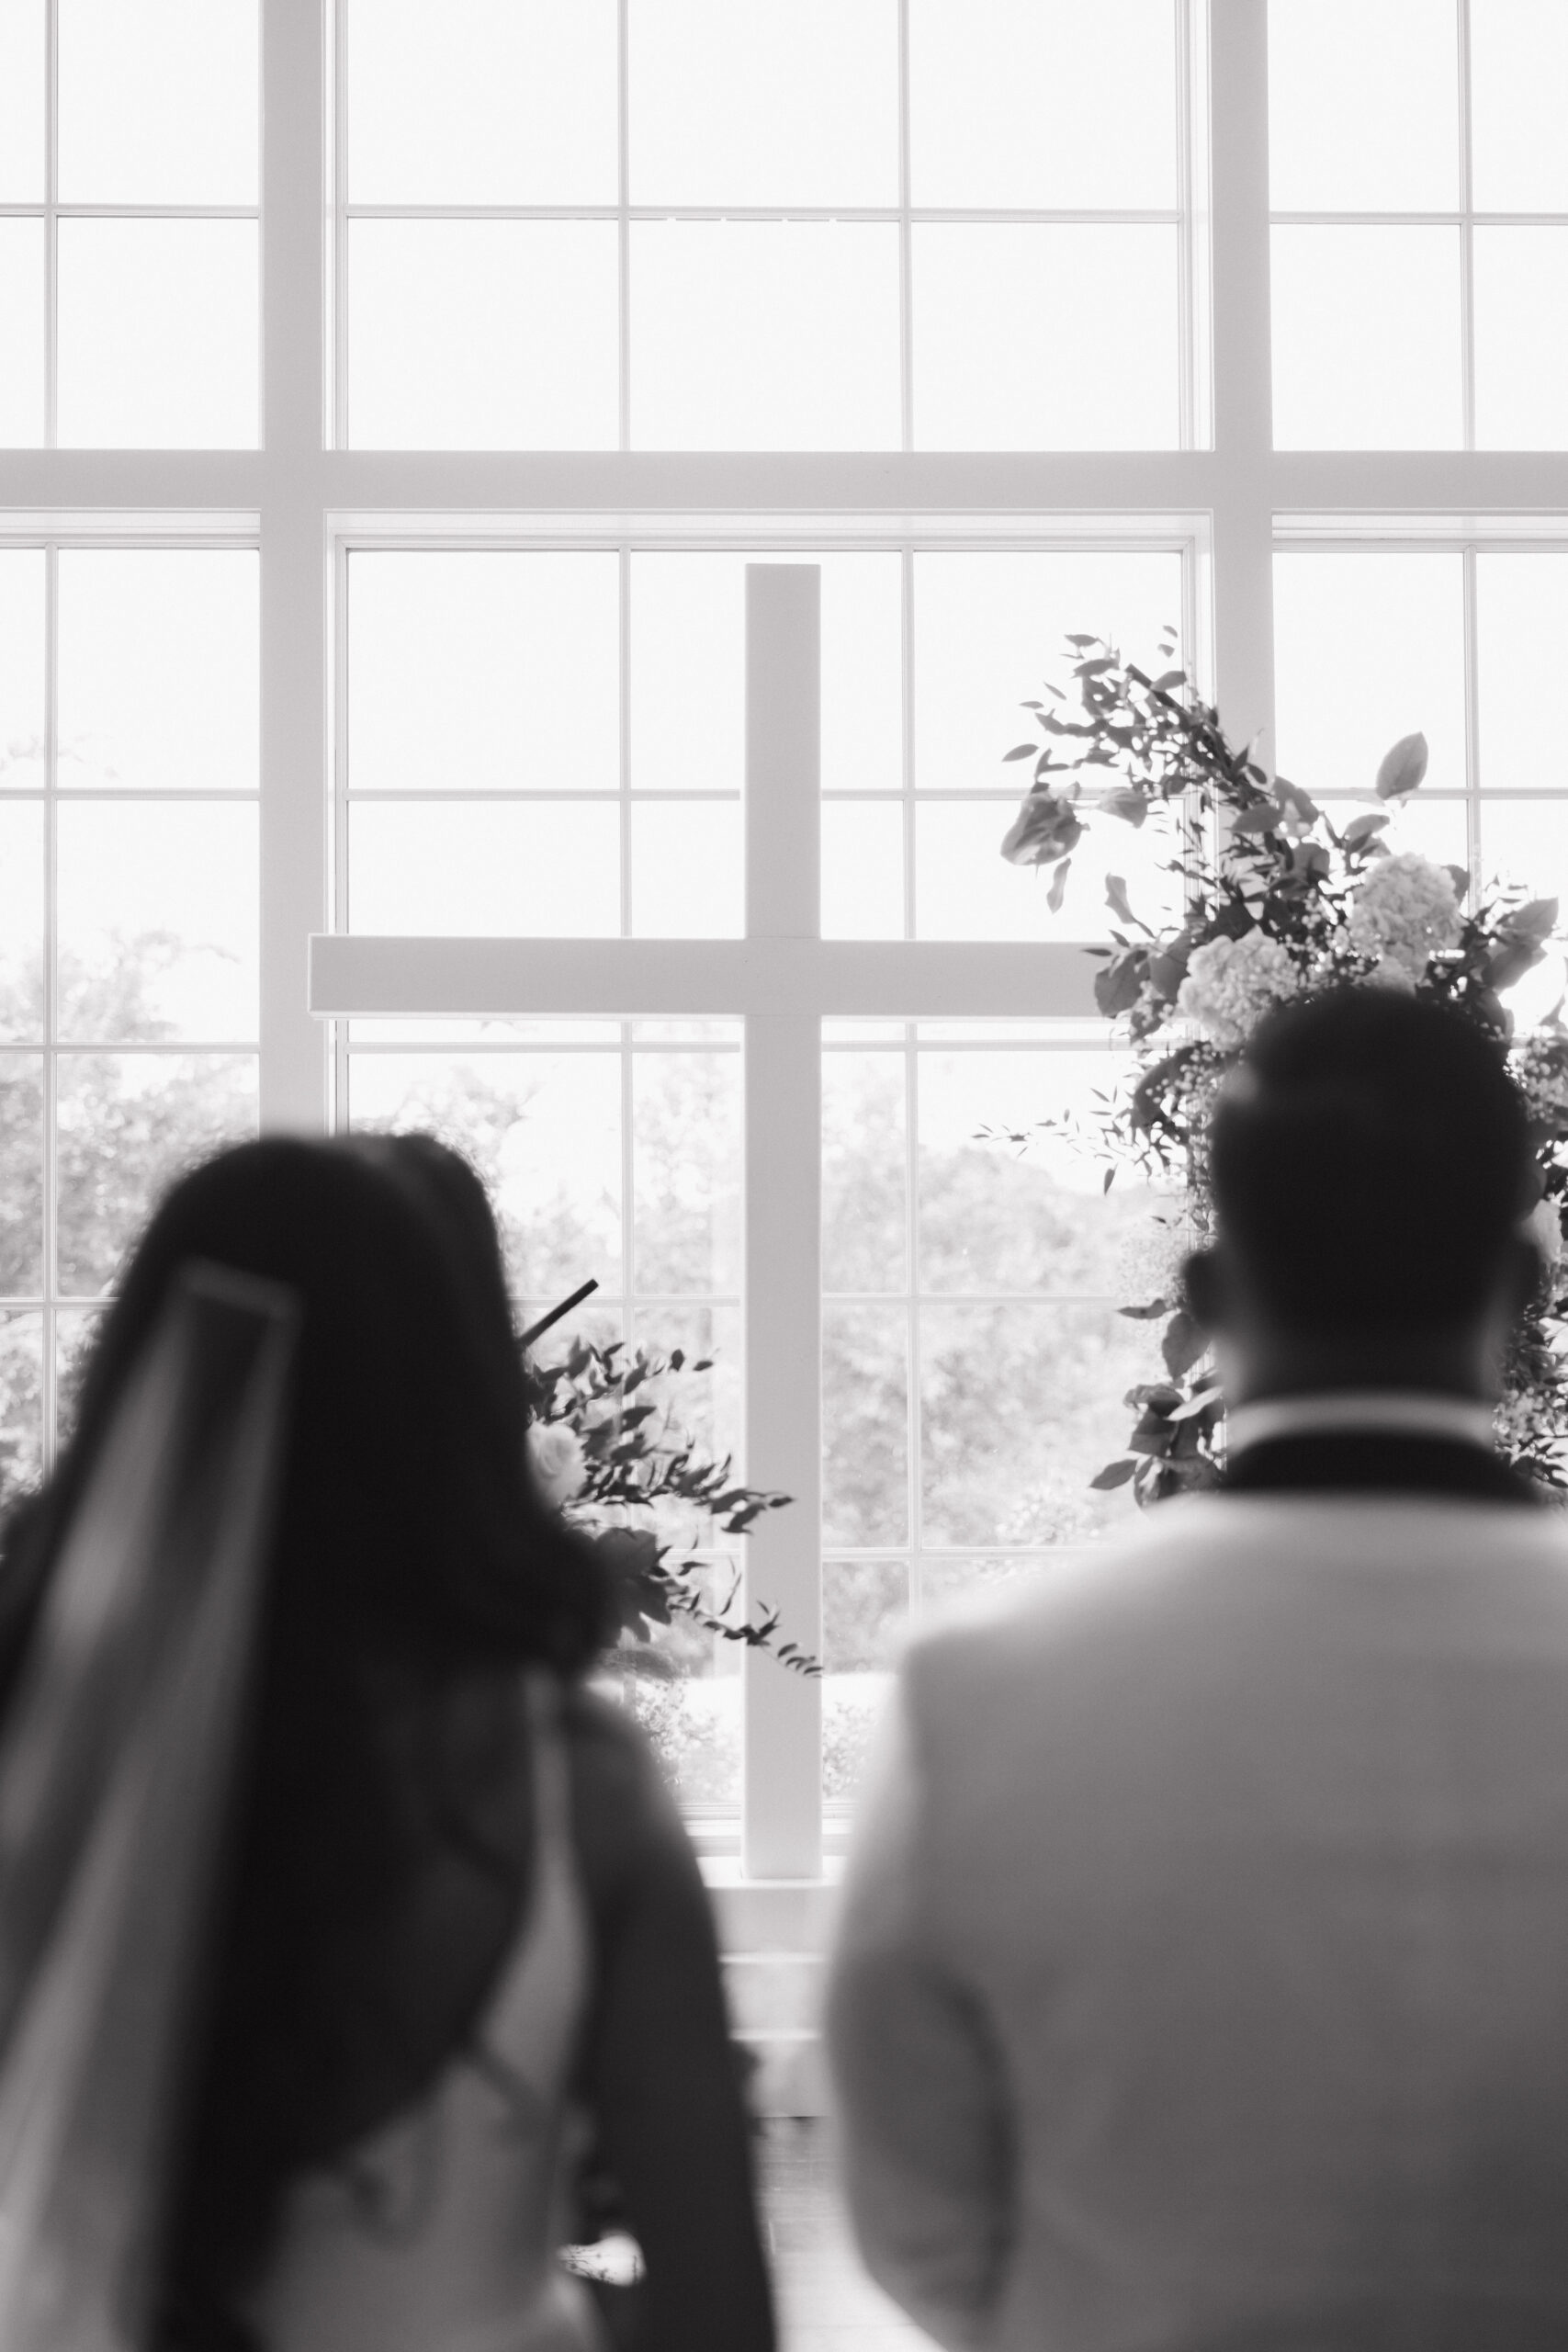 An Indian Christian Wedding at the Hillside Estate in Dallas, TX